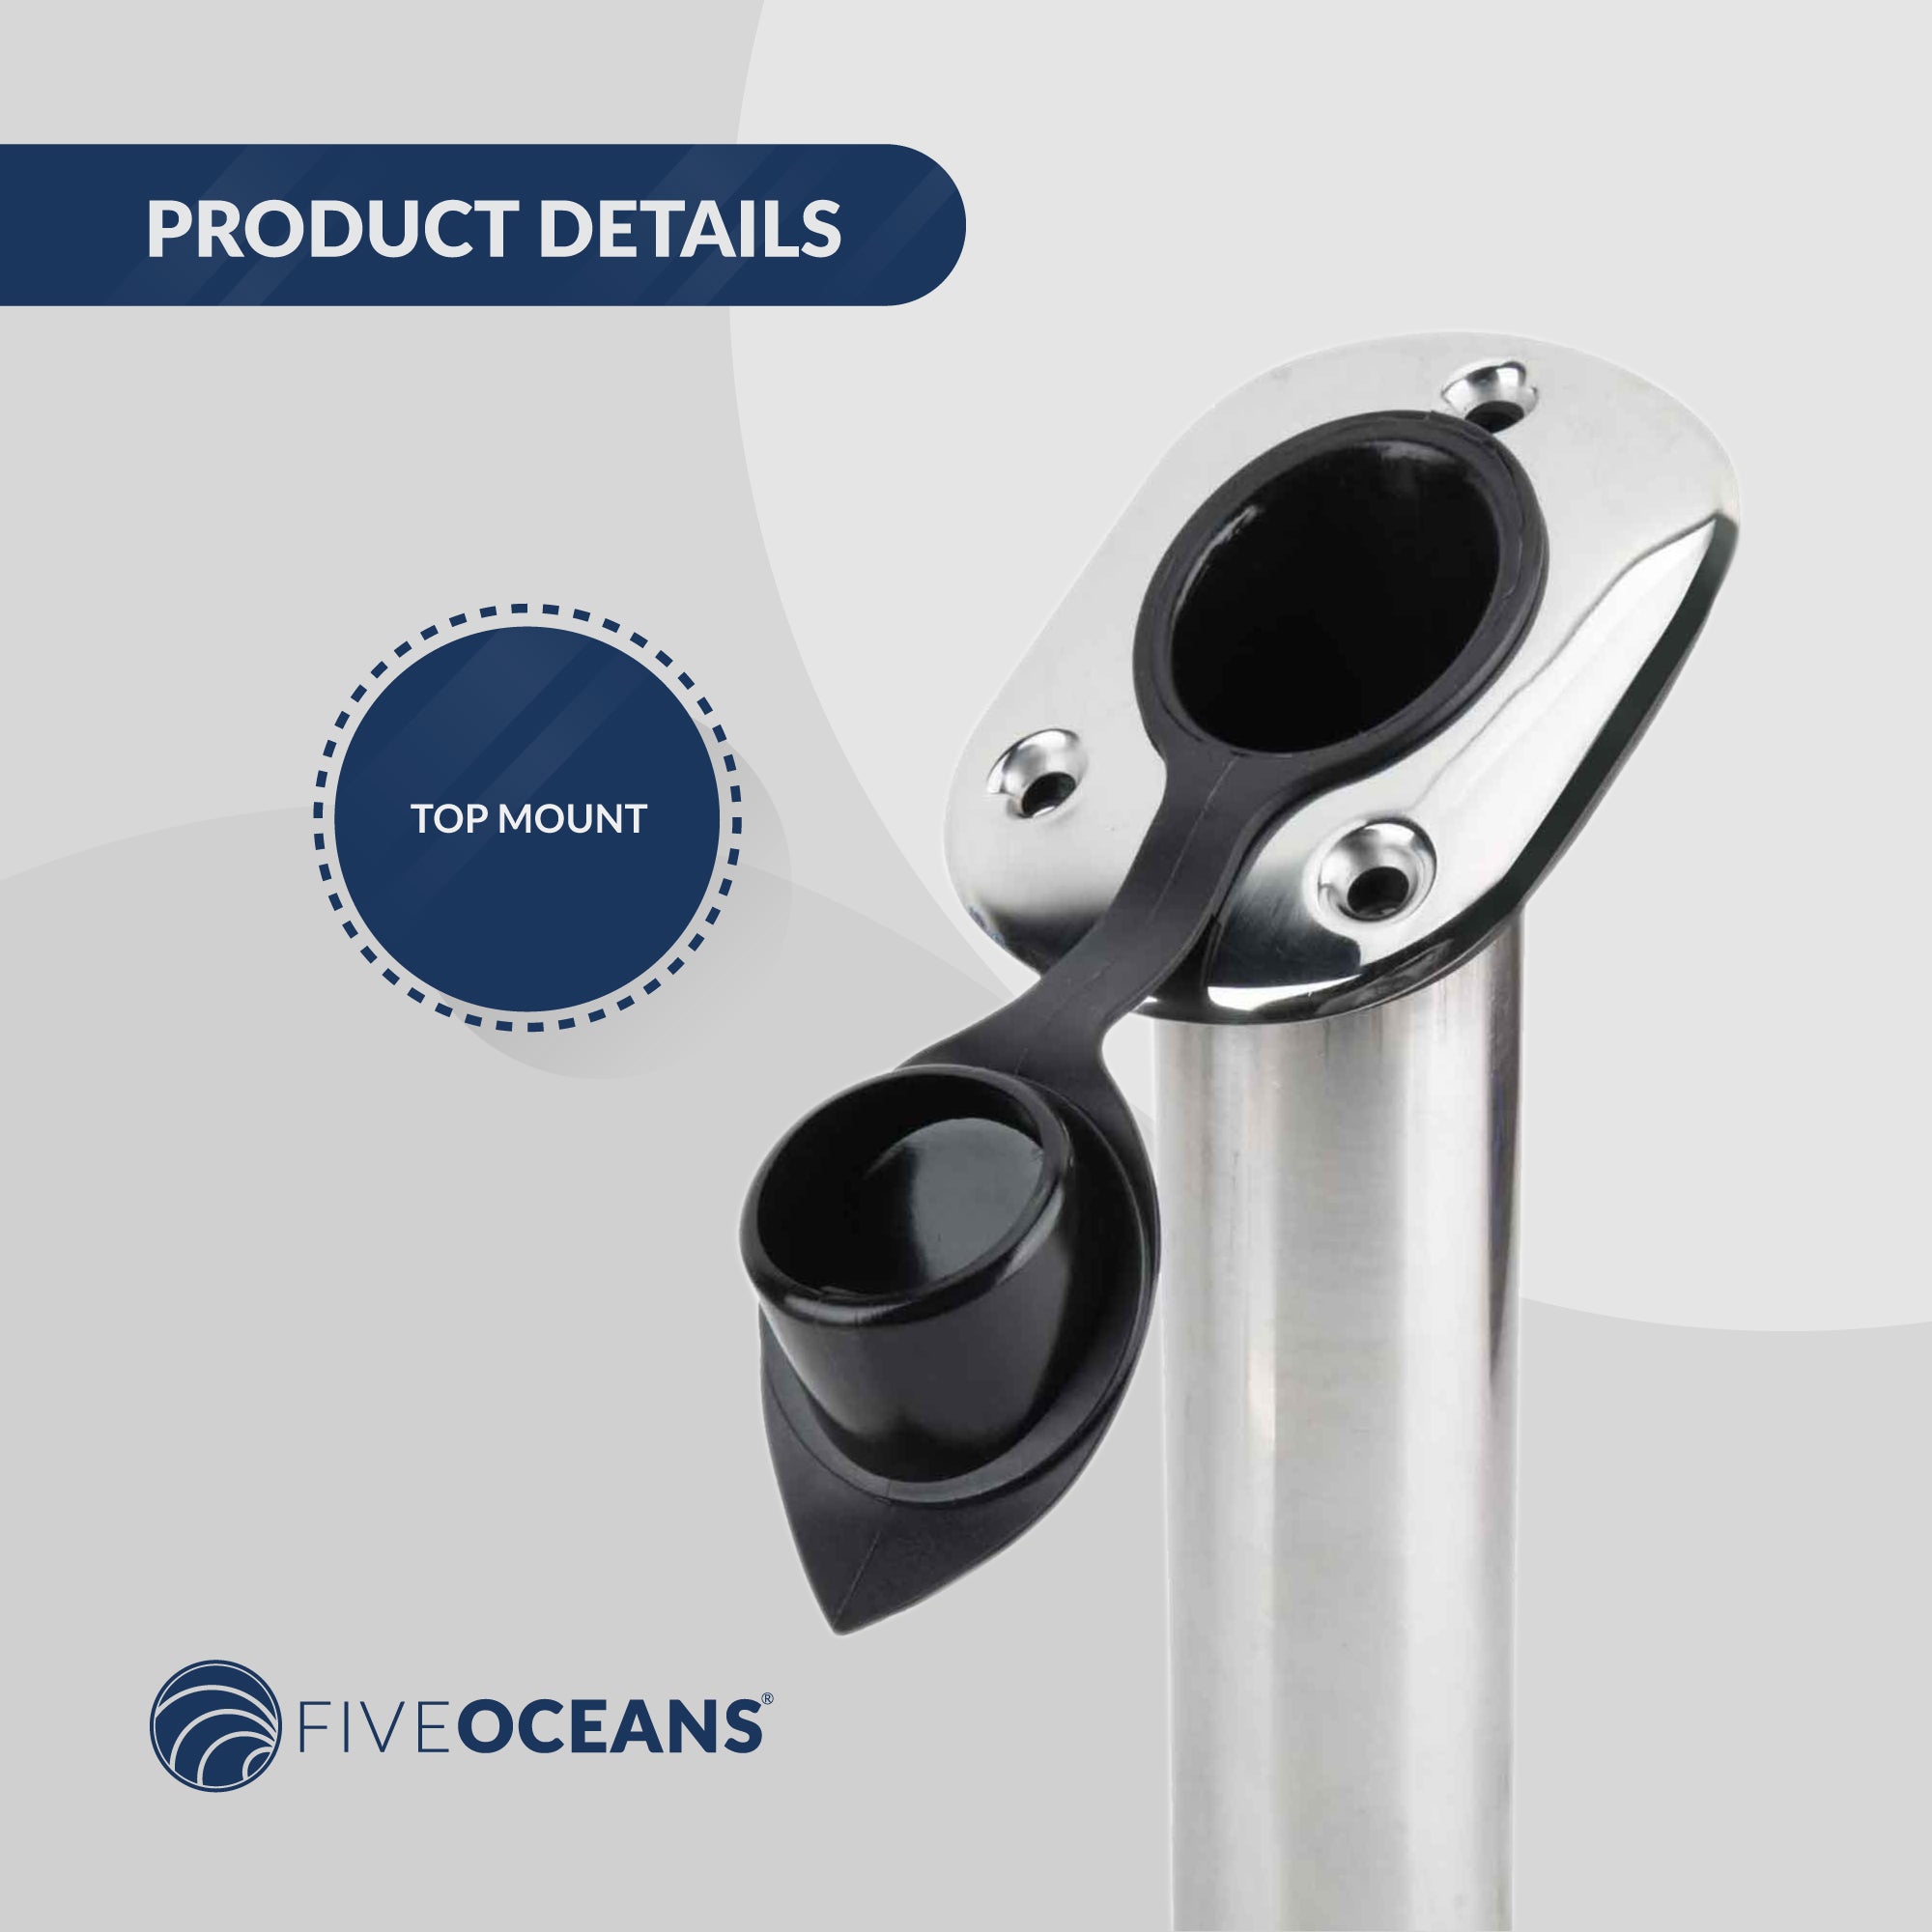 Five Oceans Stainless Steel AISI 316 Flush-Mount Fishing Rod Holder 15-Degree Top Flange w/ Flip-Up Cap, Open Base End (Pair) Fo4496-m2